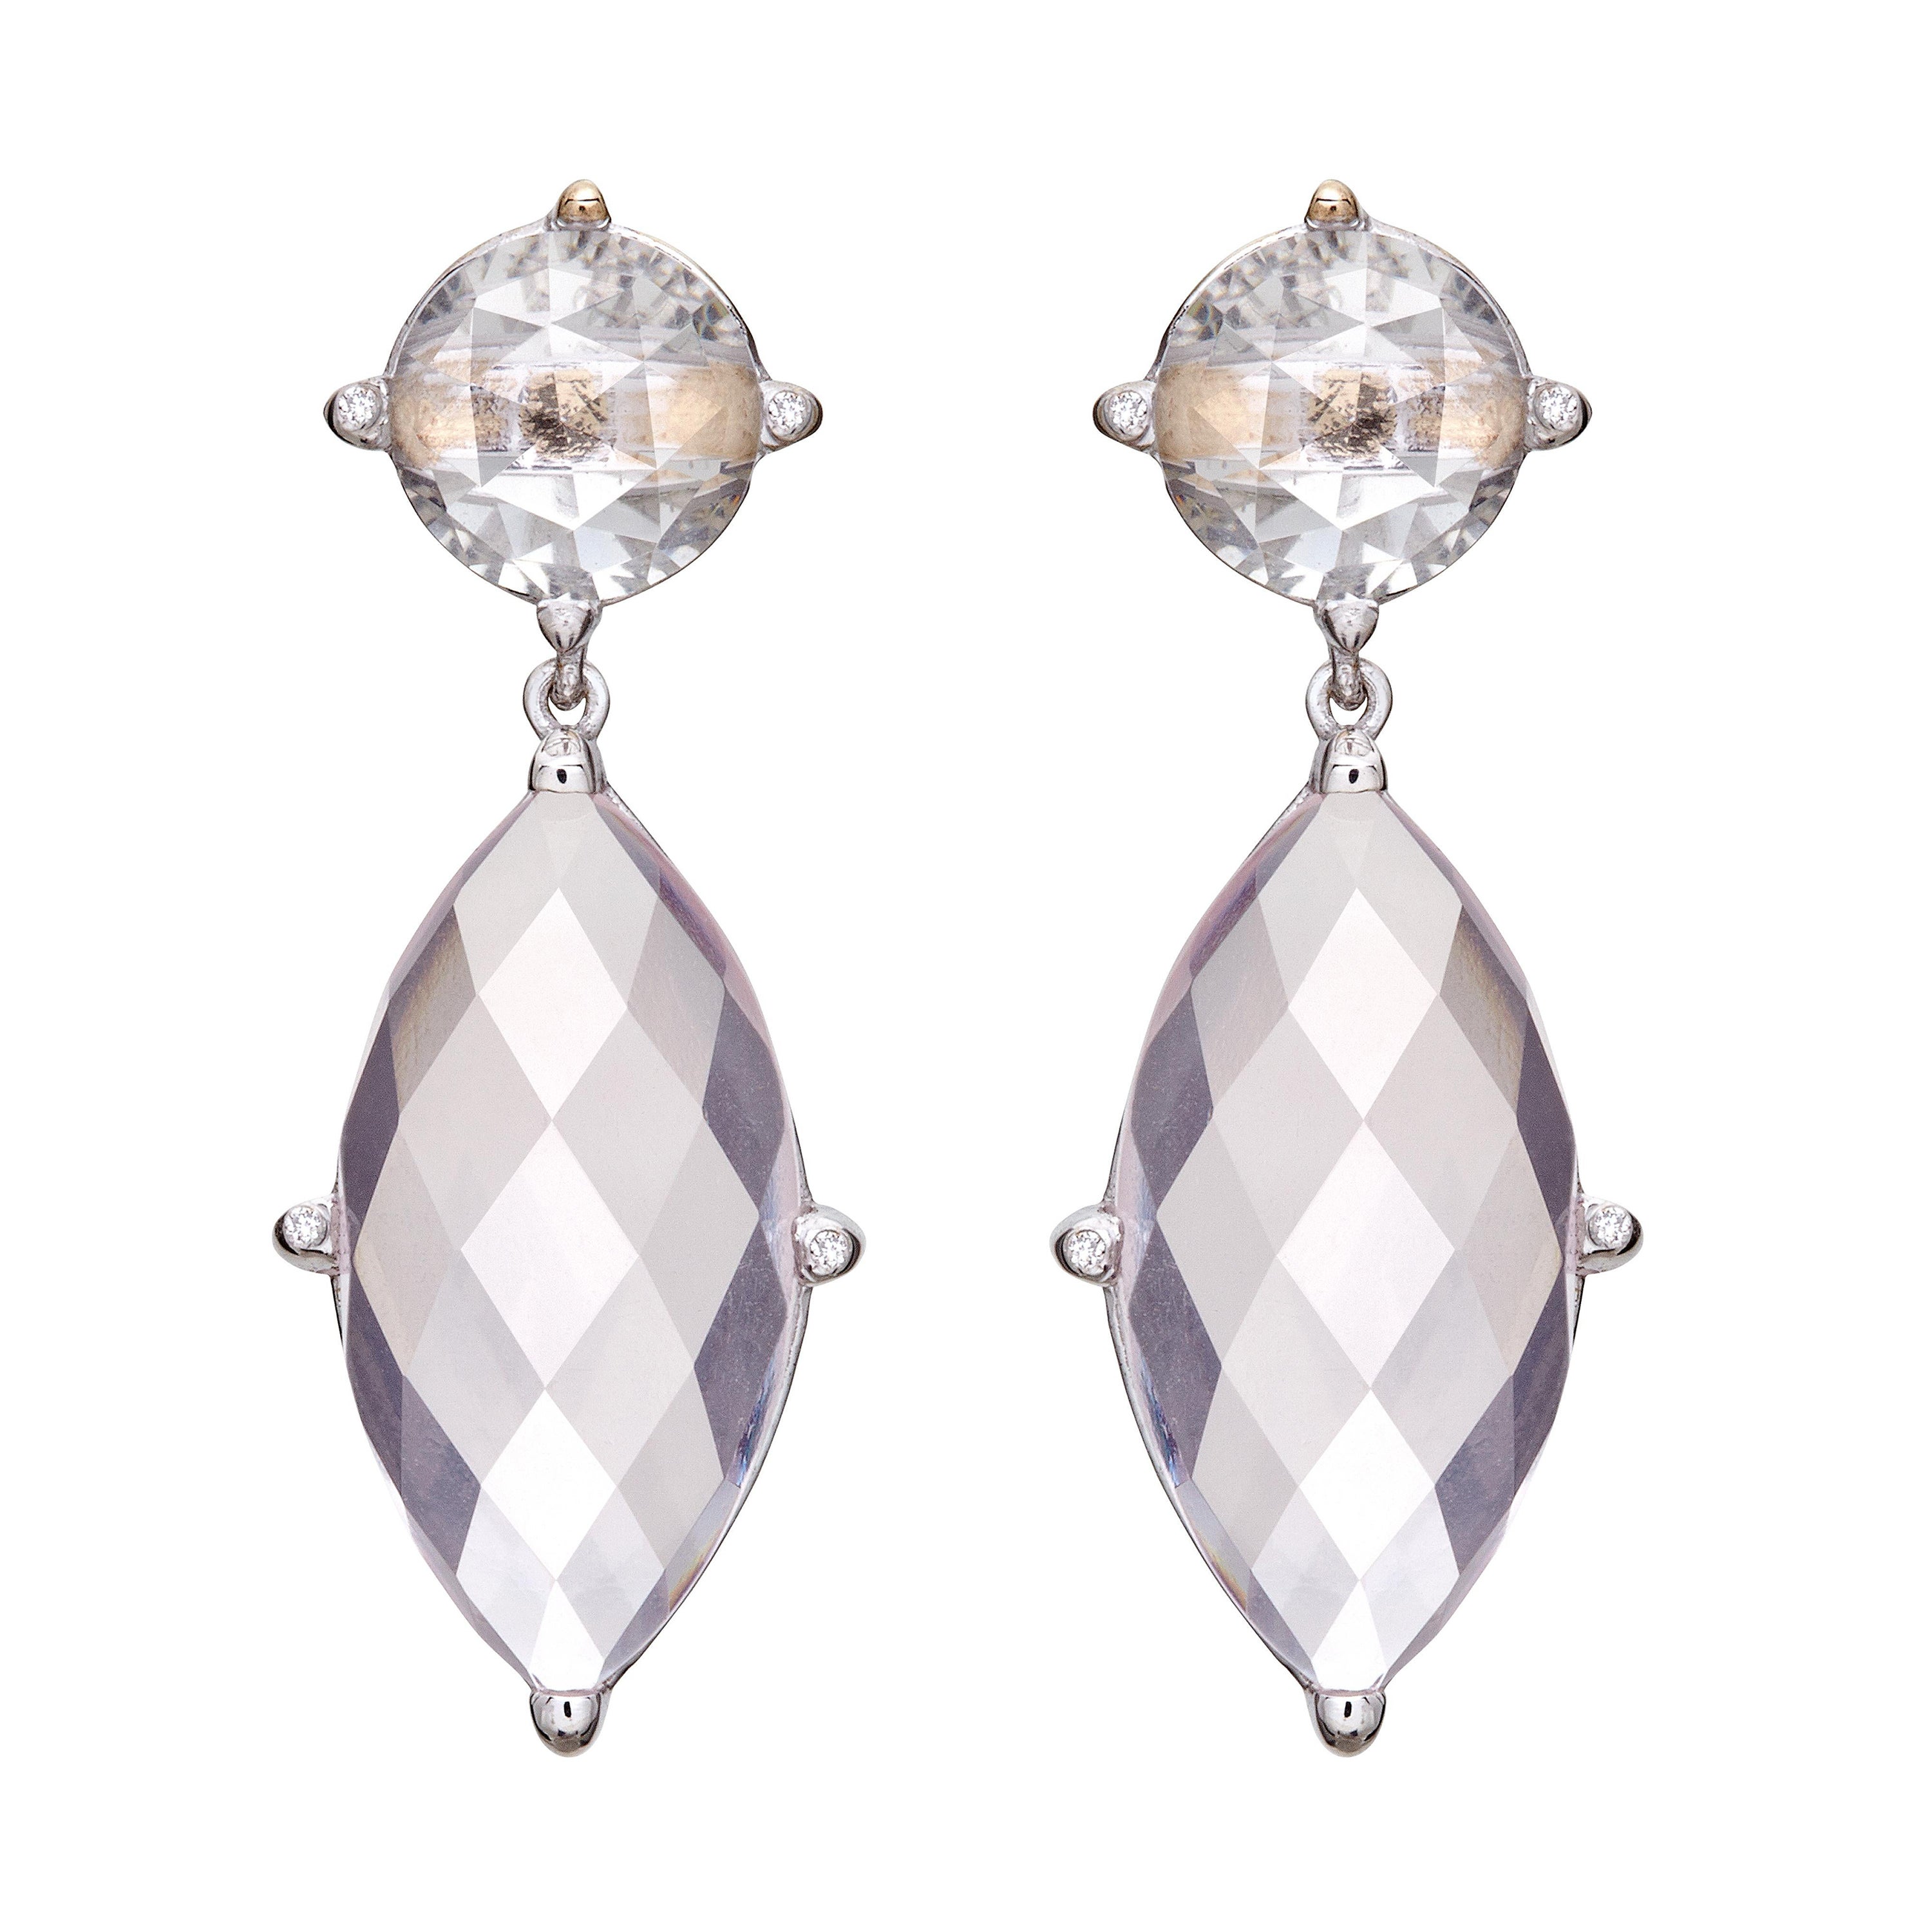 Dangle and Sparkly Earrings in 18kt White Gold with Royal Quartz and Diamonds